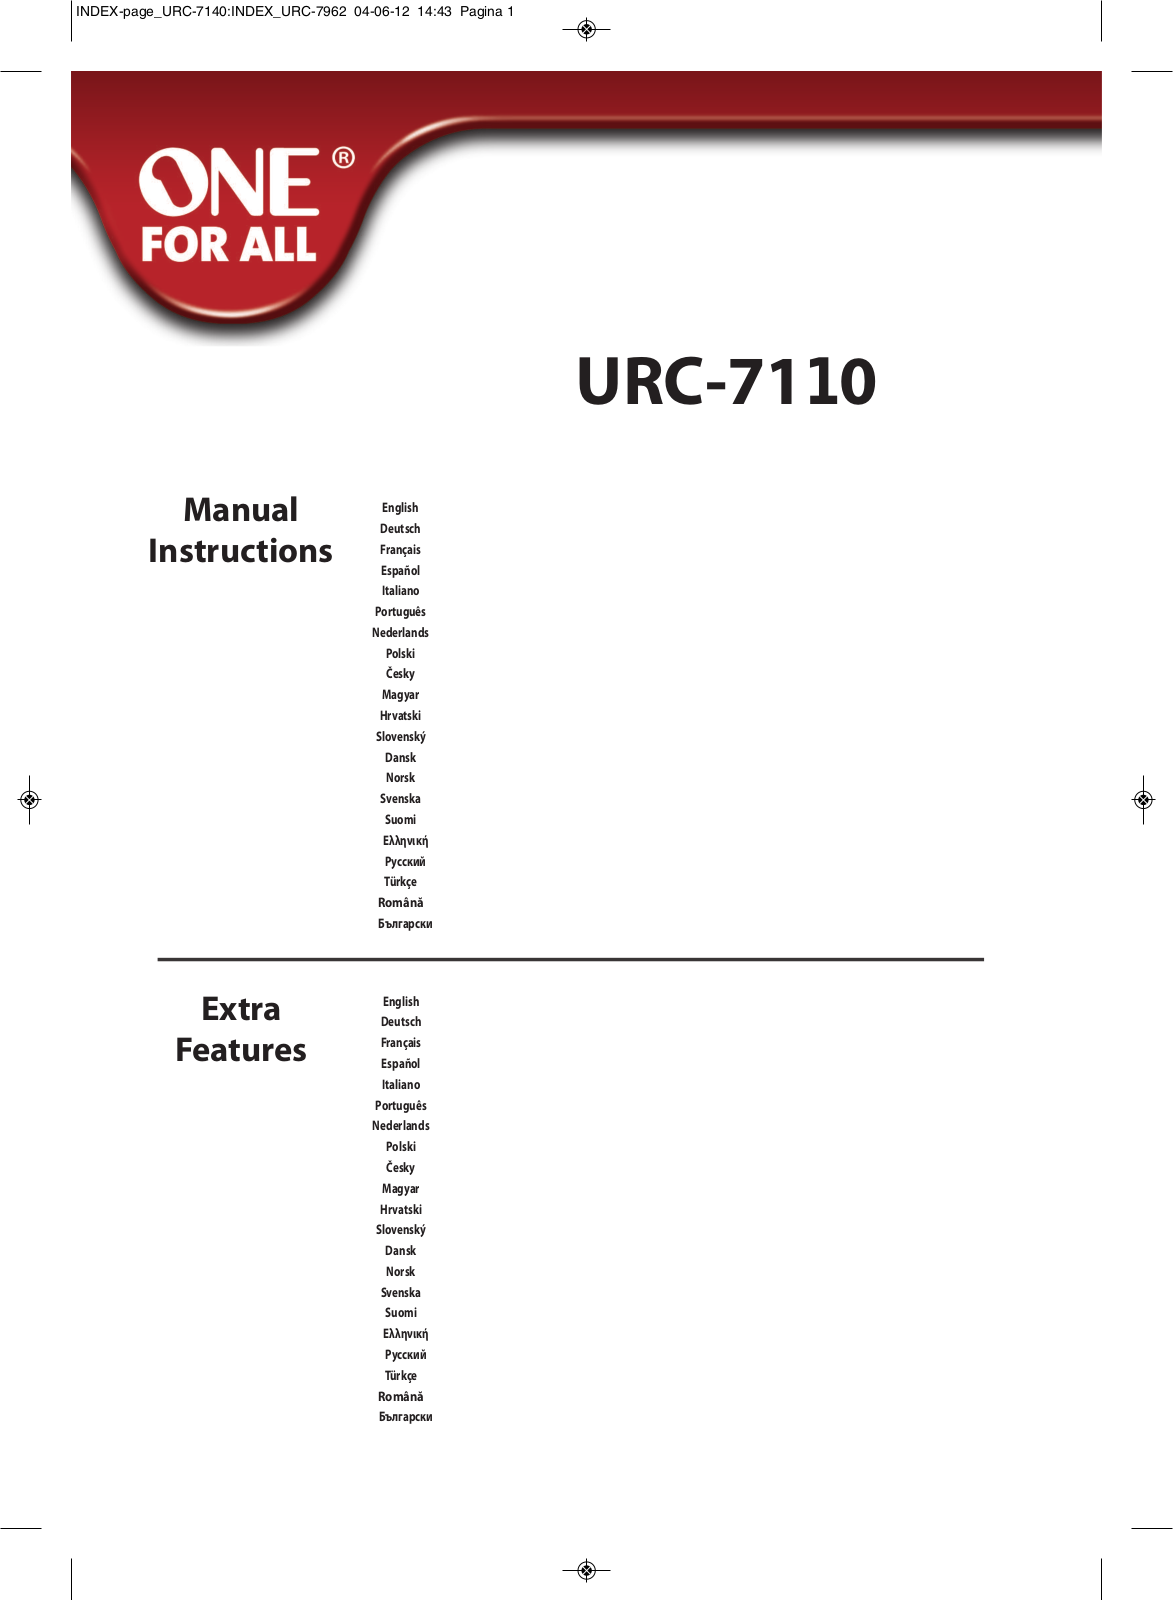 One for All URC 7110 User Manual